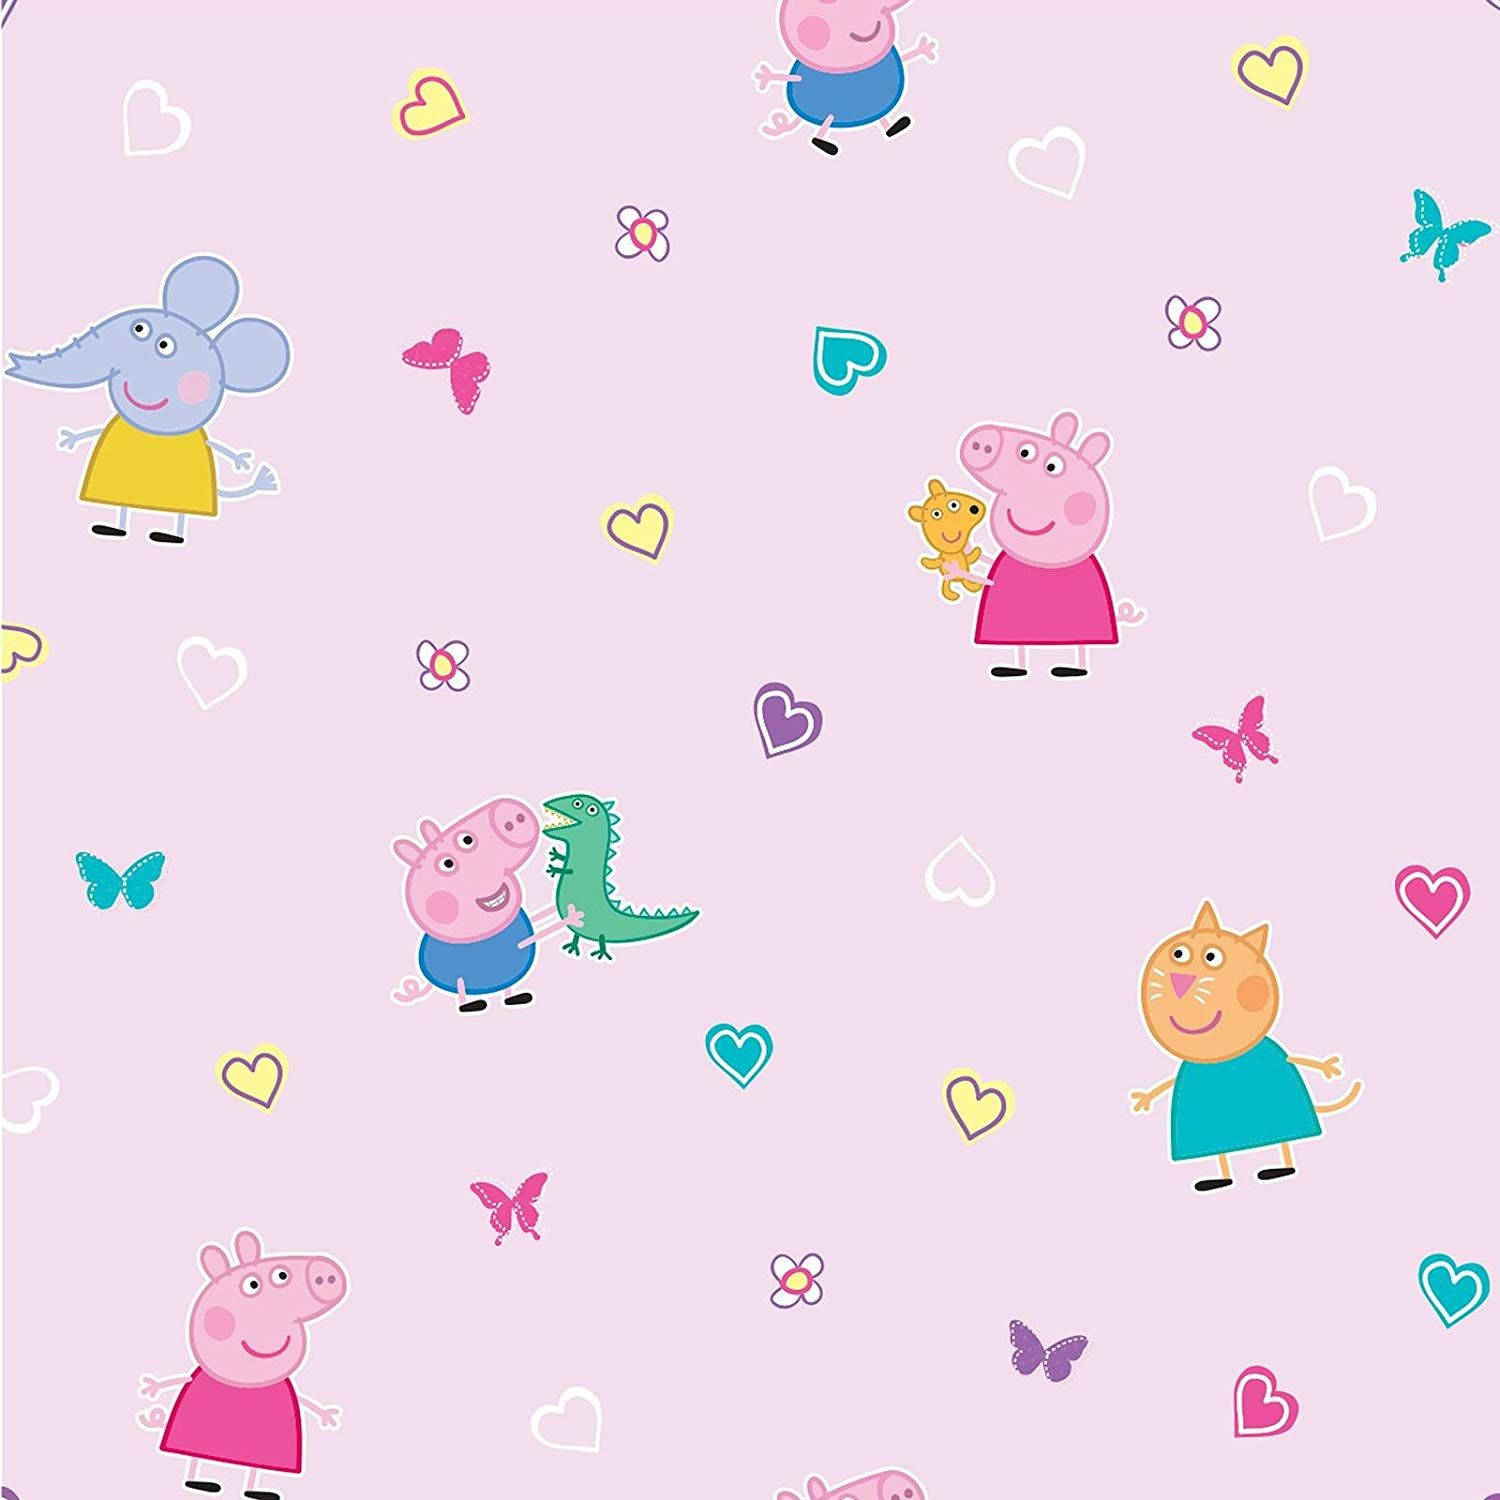 Cute Peppa Pig and toys pattern wallpaper.